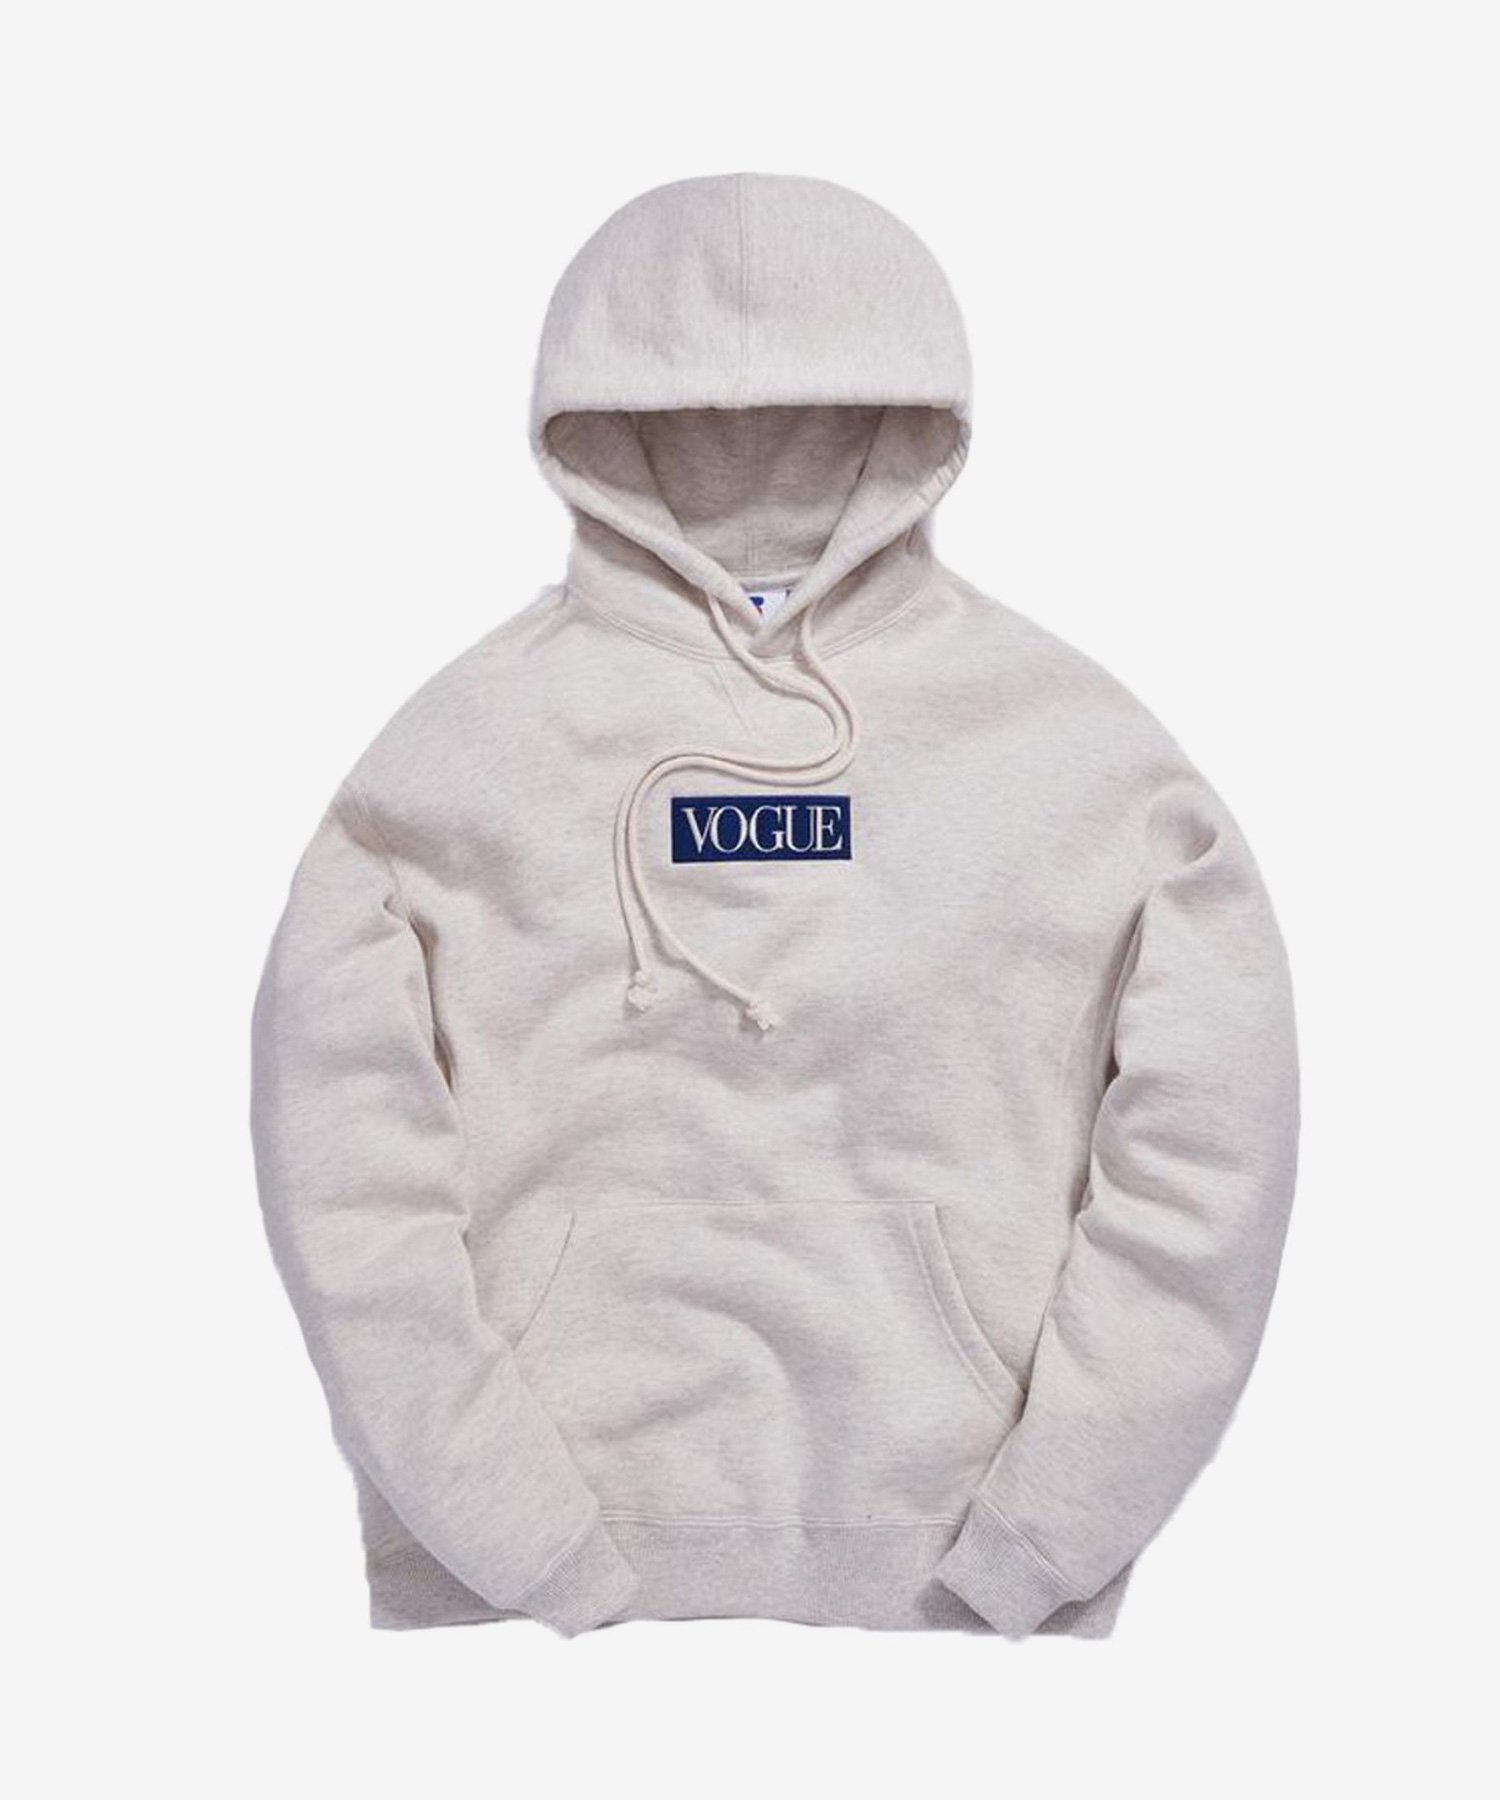 Kith X Russell Athletic Vogue La Hoodie - California Outfitters 